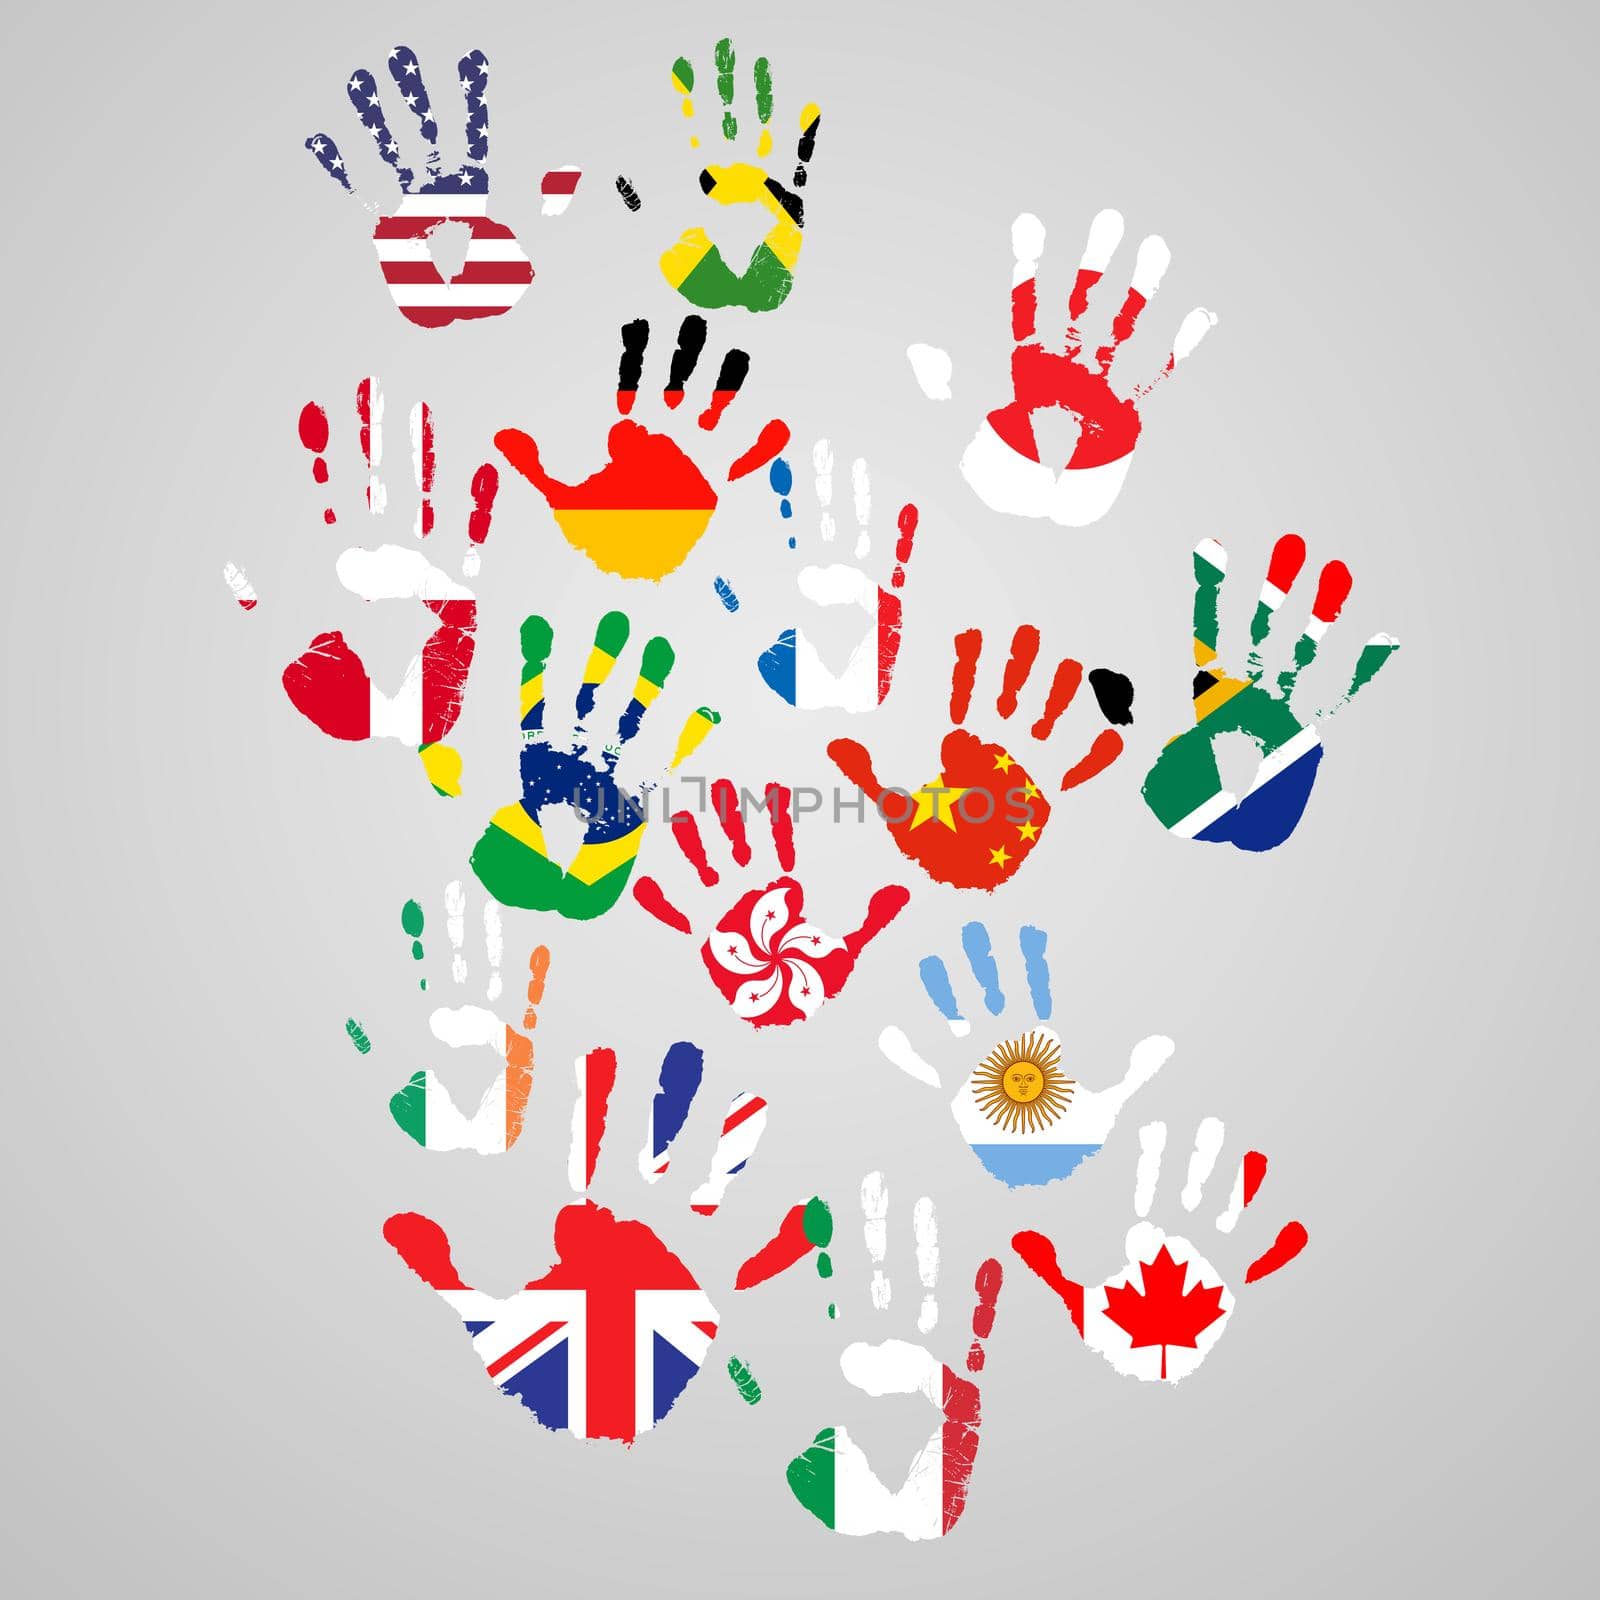 Lending a hand to global change. Representations of handprints from people around the world. by YuriArcurs